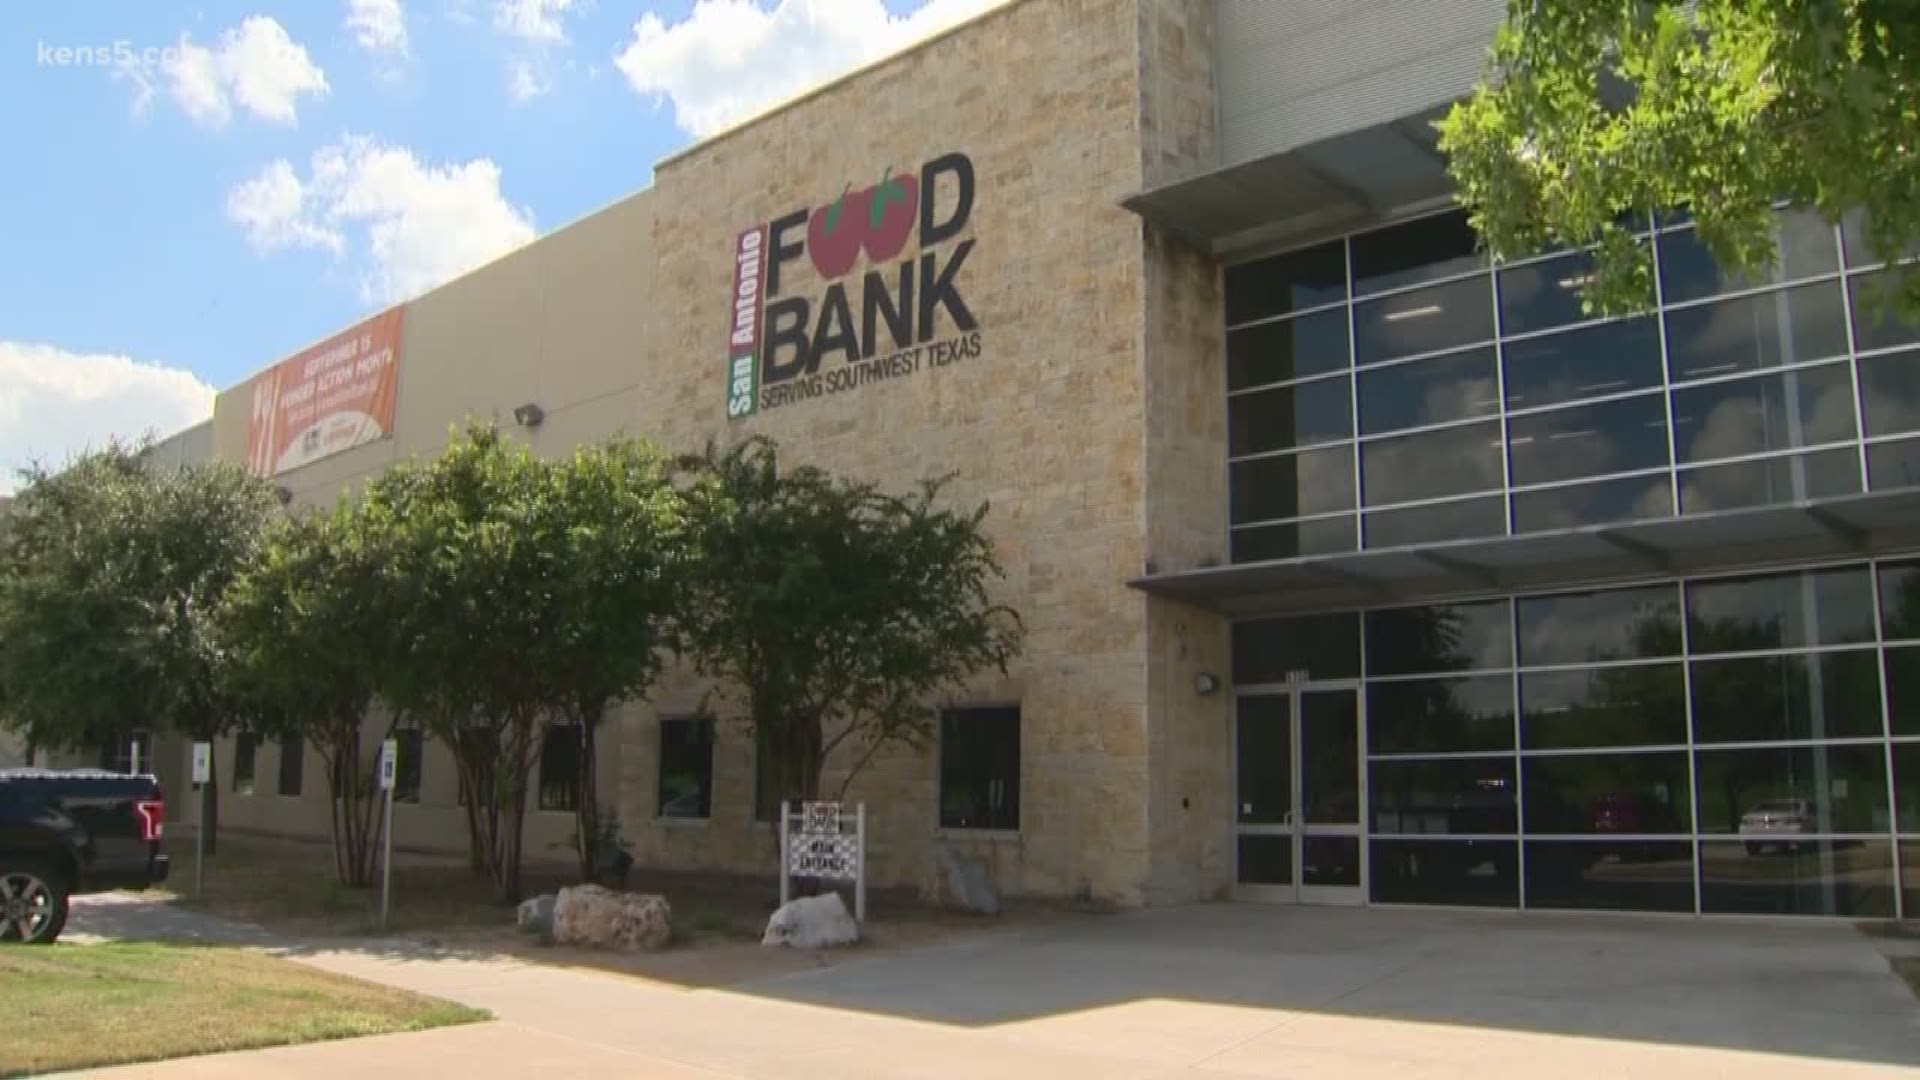 With a simple search at claimittexas.org, KENS 5 was able to uncover $20,000 in unclaimed funds that the San Antonio Food Bank will now use to help more people.